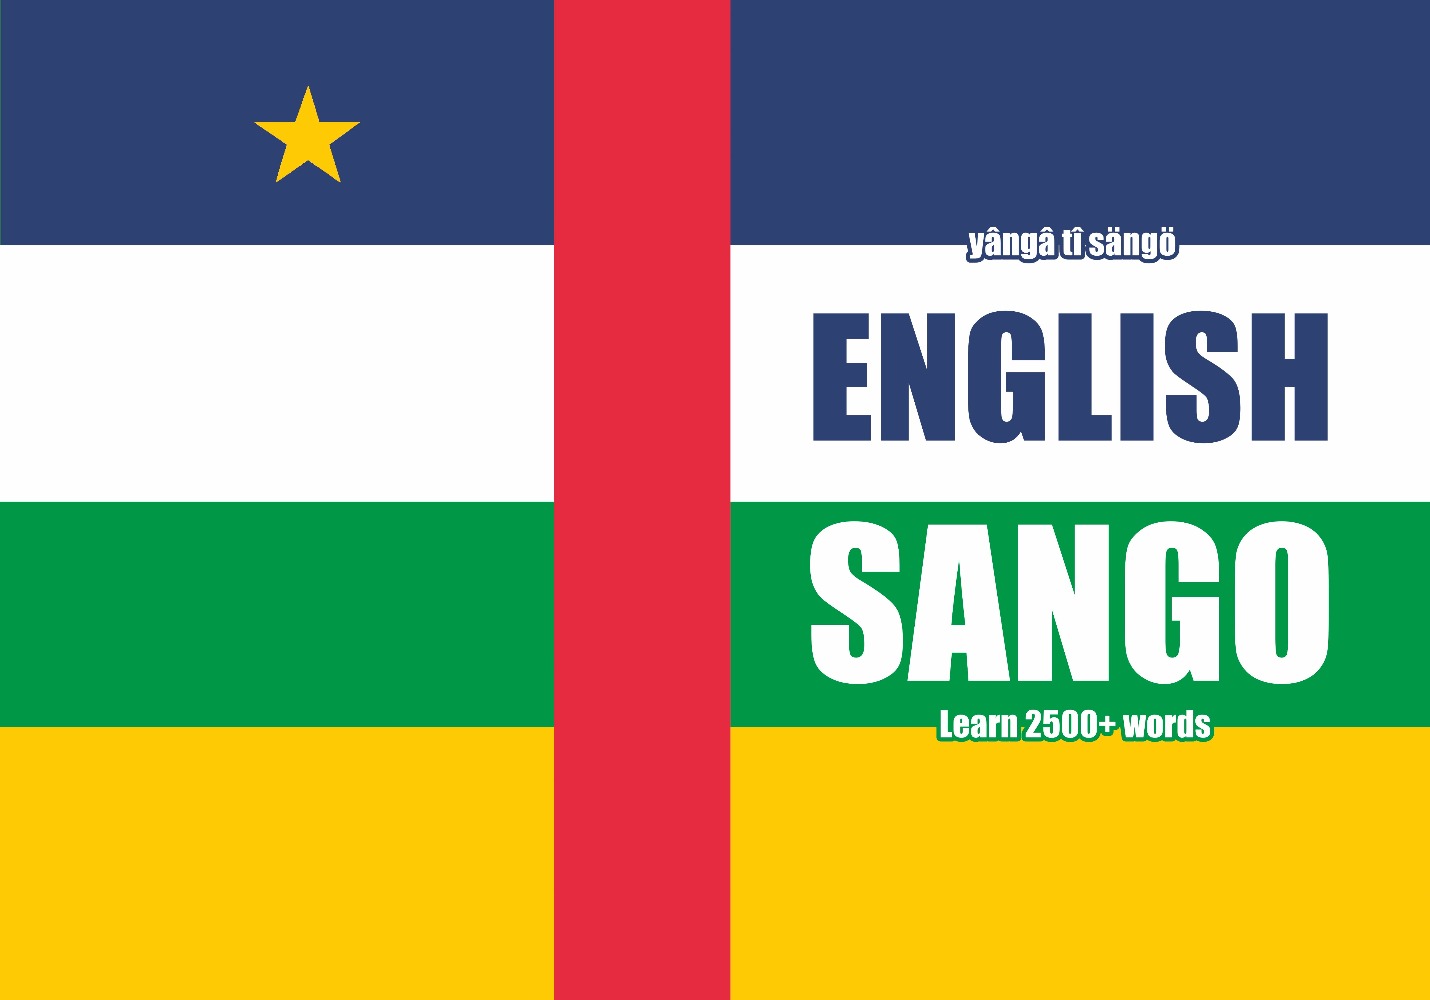 Sango language learning notebook cover